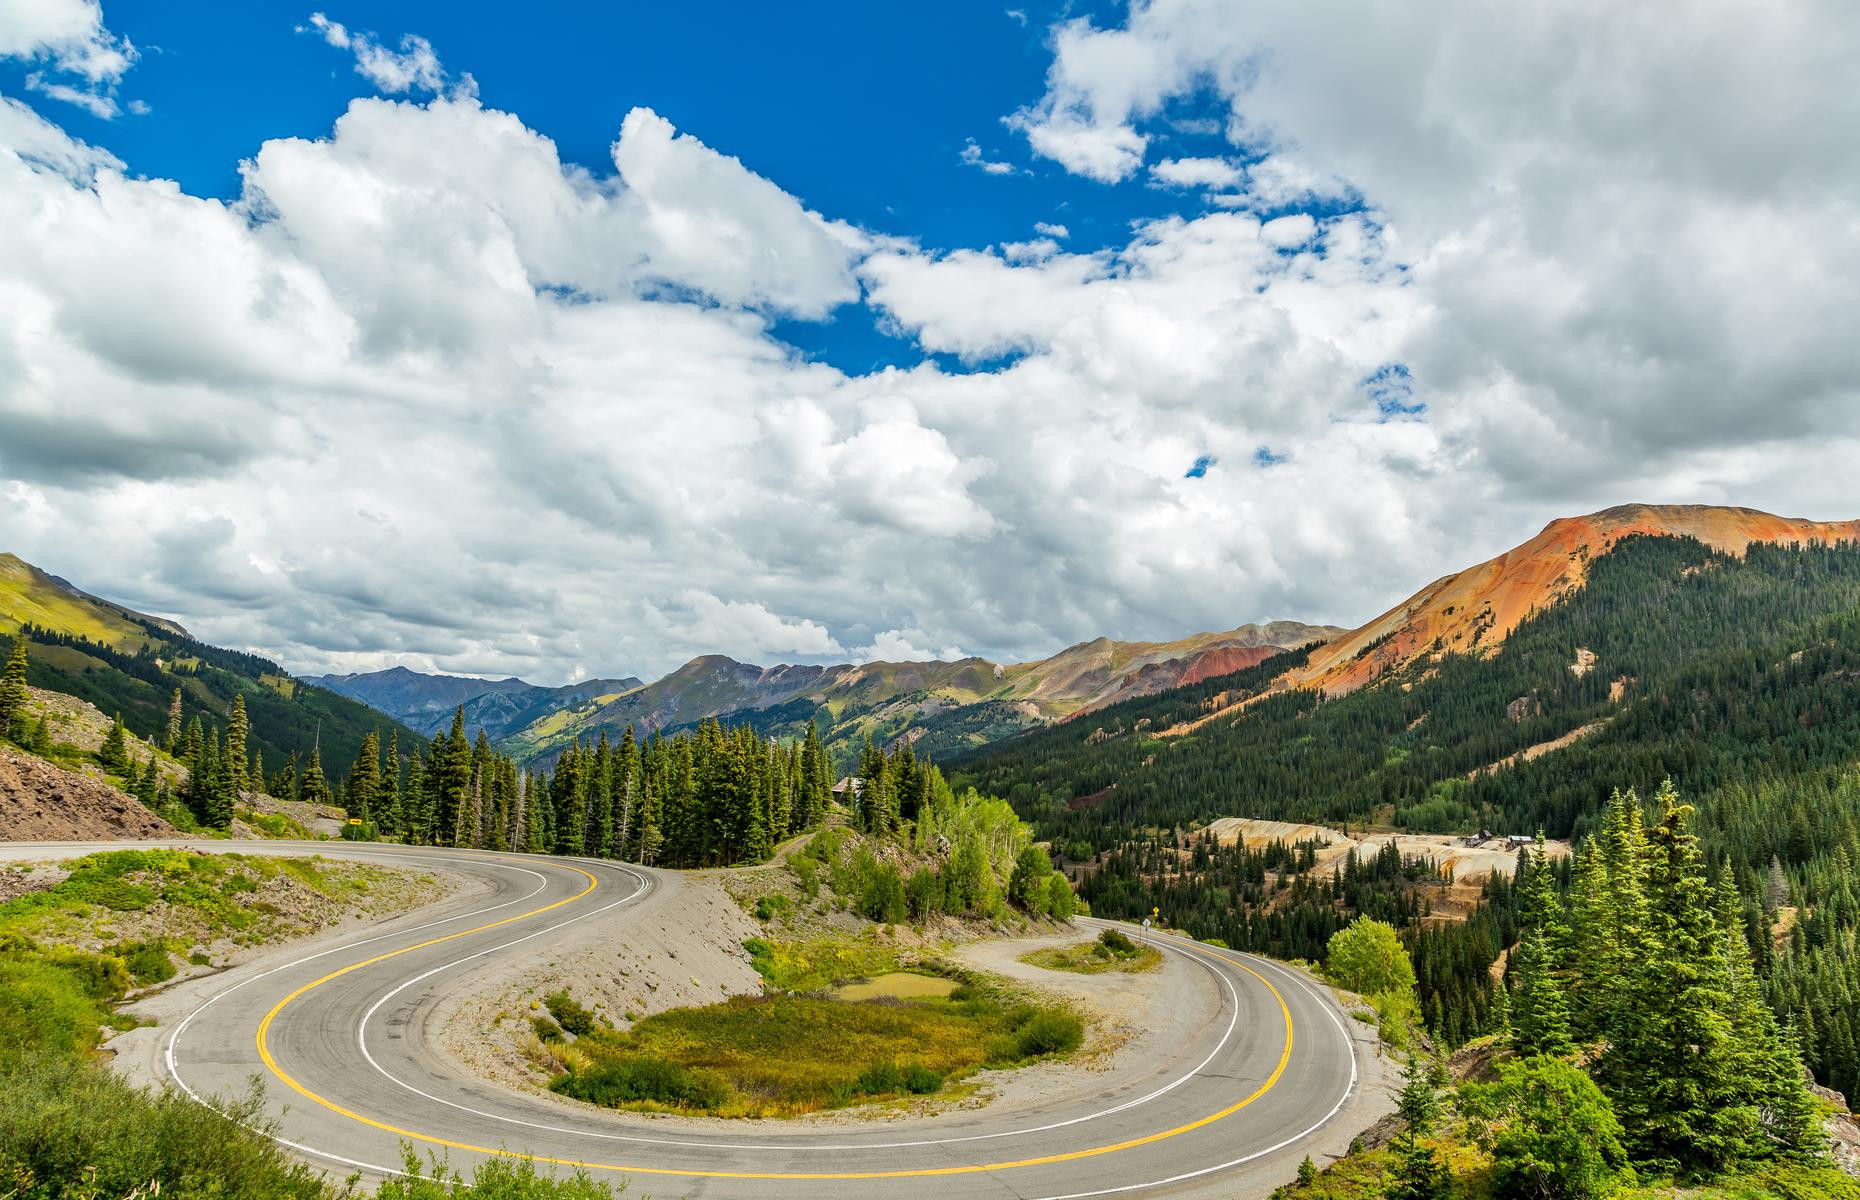 <p>Winding for 233 miles (375km) through the red-peppered San Juan Mountains, the <a href="https://www.durango.org/discover-durango/the-san-juan-skyway">San Juan Skyway</a> is one of those roads that really is all about the drive. There are fascinating places to stop, from historic railroad town Durango to ski resort Telluride. But it’s the twists and turns, at some points revealing mountain-ringed lakes and at others bringing you to the edge of dramatic canyons, that’ll linger longest in the memory.</p>